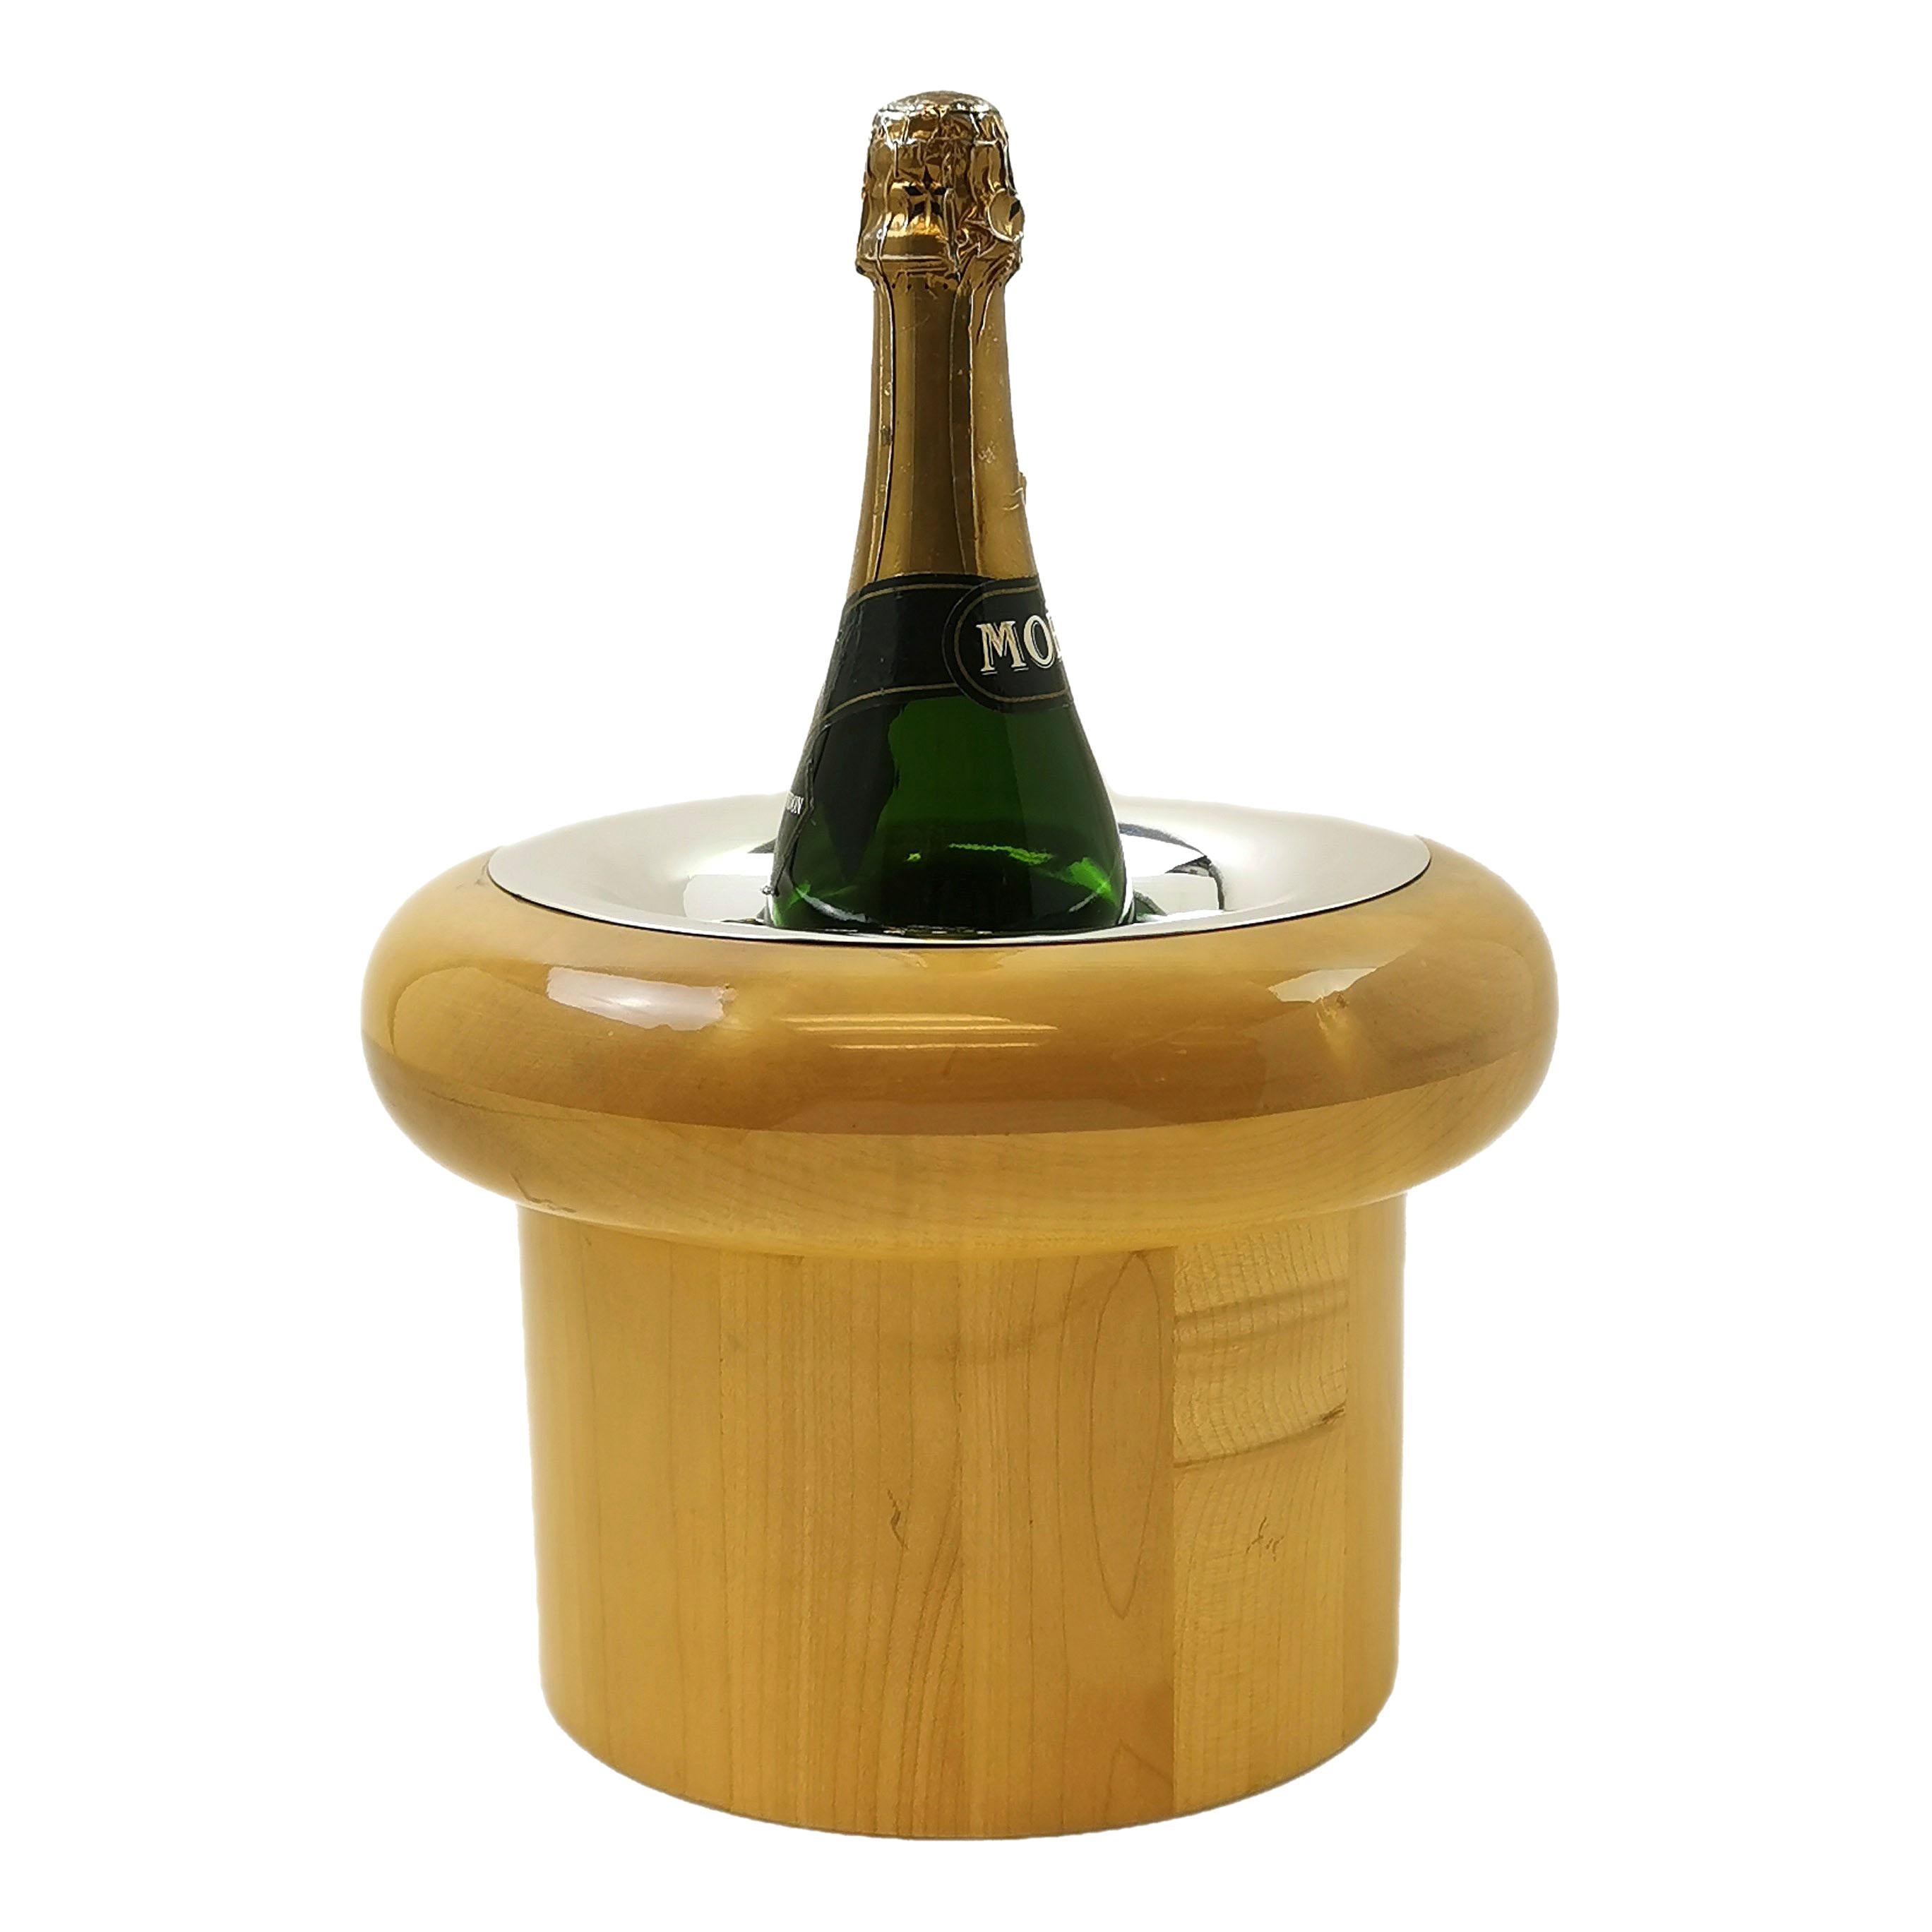 Gerald Benney Sterling Silver and Wood Champagne Cooler Wine Ice Bucket, 1993 For Sale 1